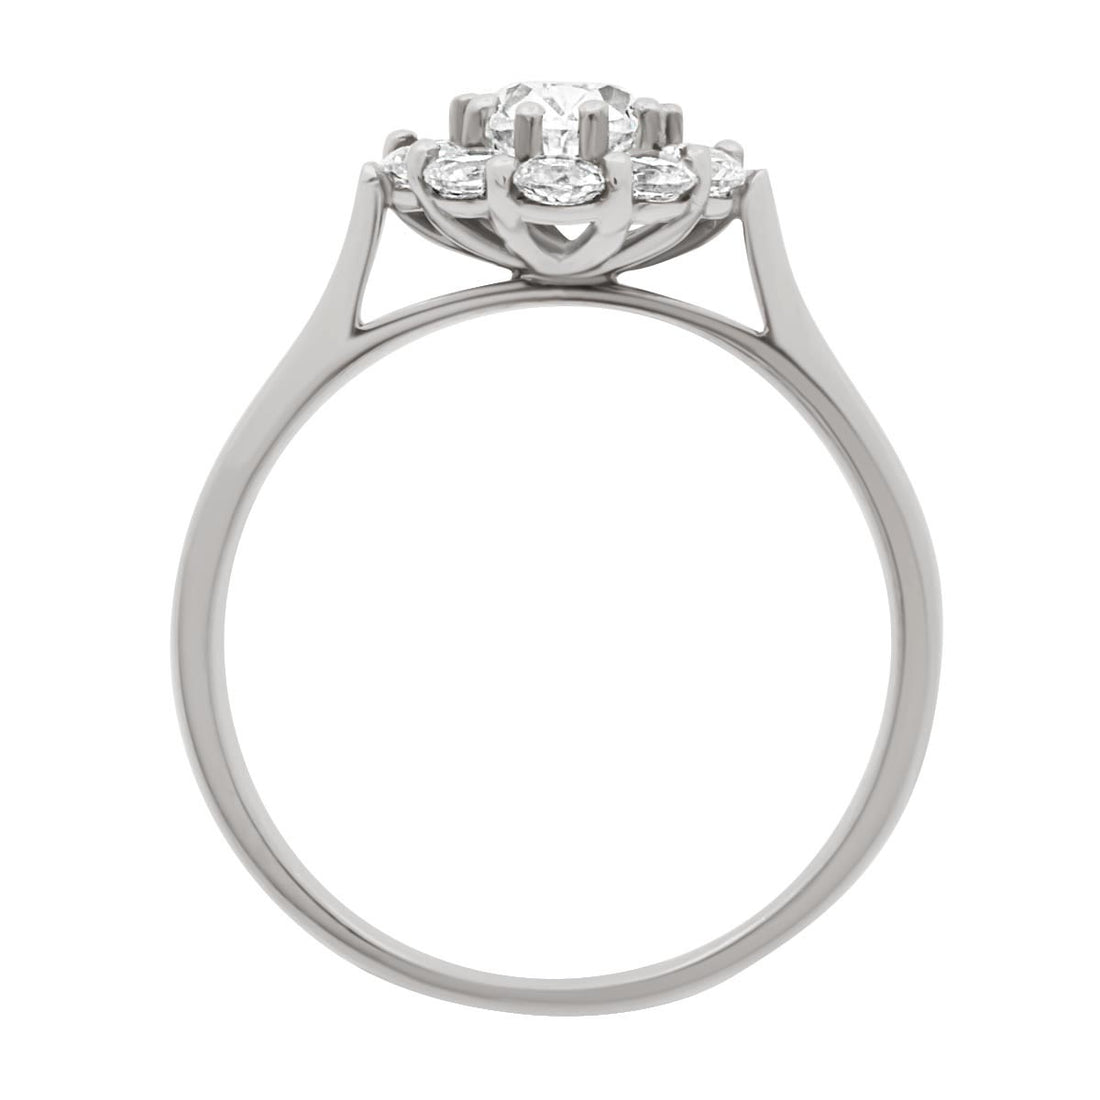 Cluster Engagement Ring IN WHITE GOLD in an upright standing position